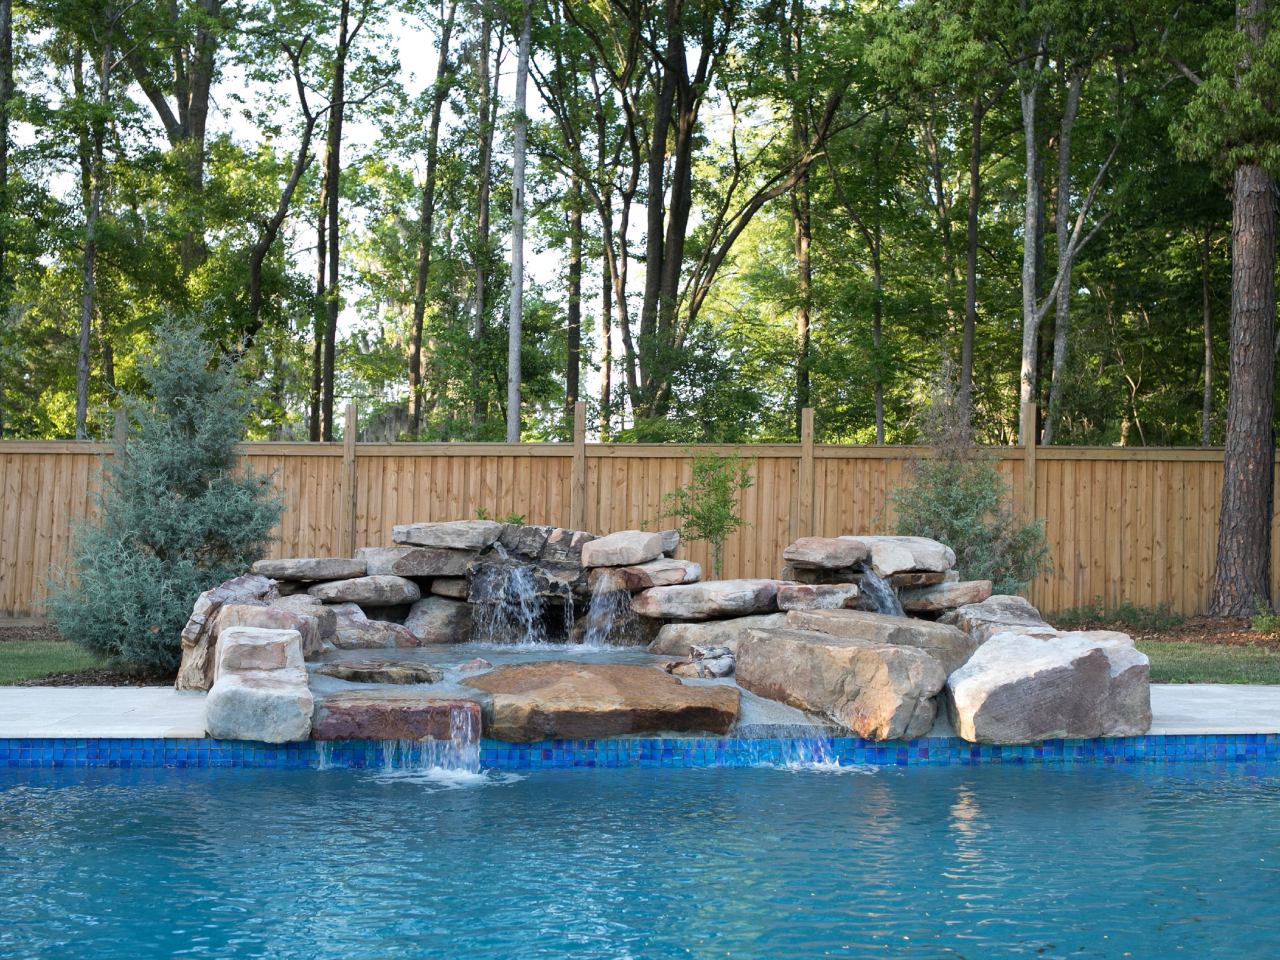 Travertine paver pool deck remodel with natural Stone boulder waterfall. Paver shape-French Pattern, color-Ivory.